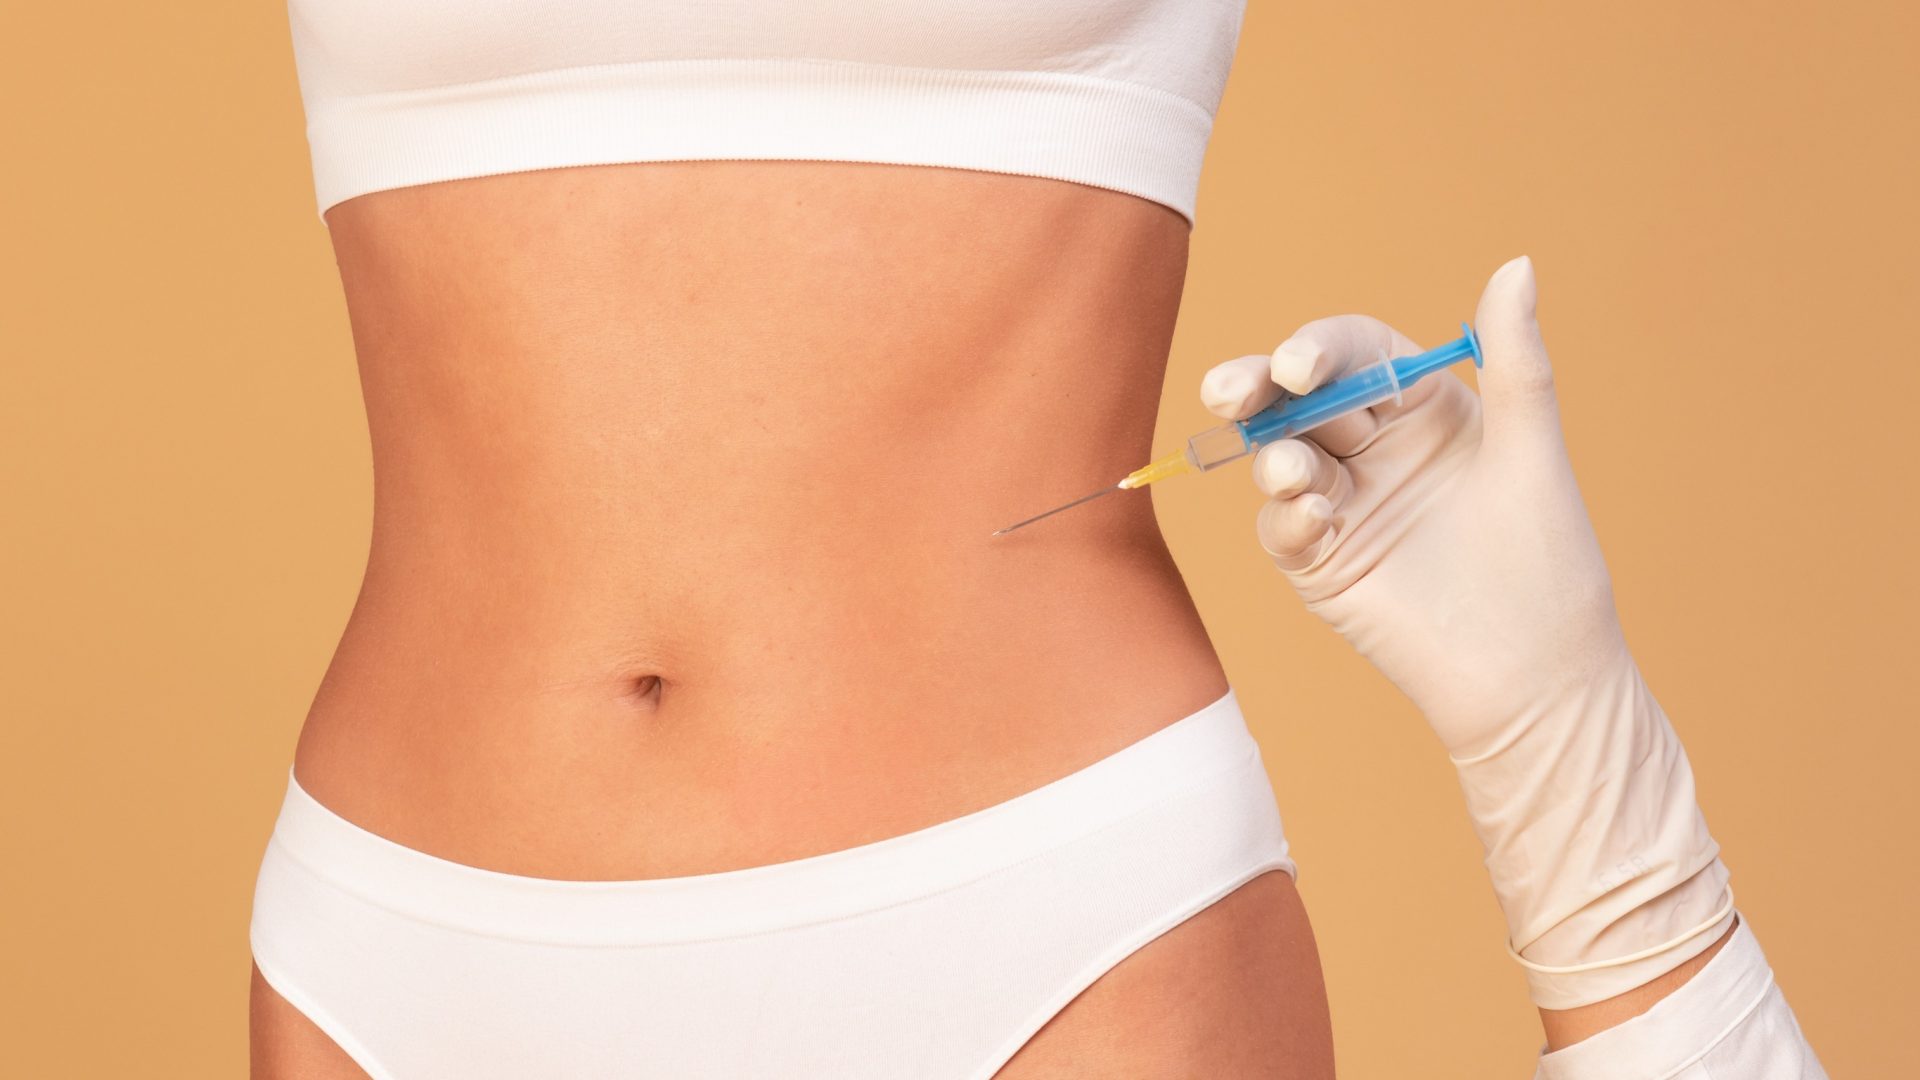 B12 and Lipotropic Injections